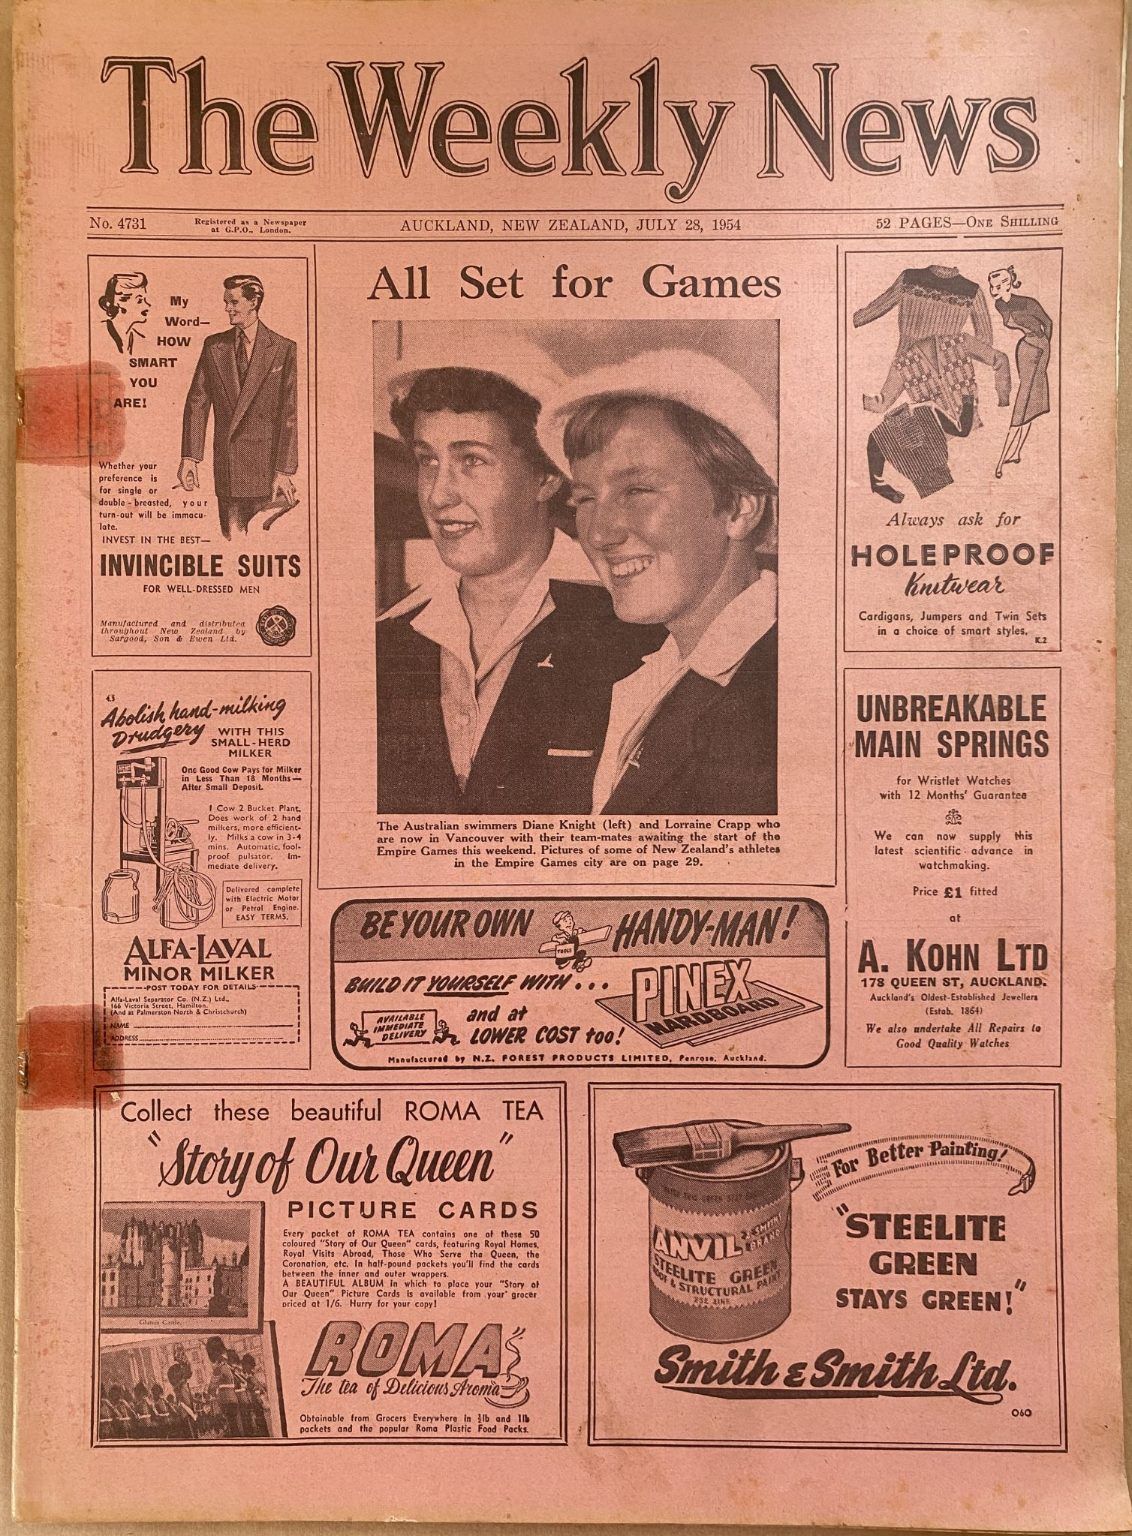 OLD NEWSPAPER: The Weekly News - No. 4731, 28 July 1954